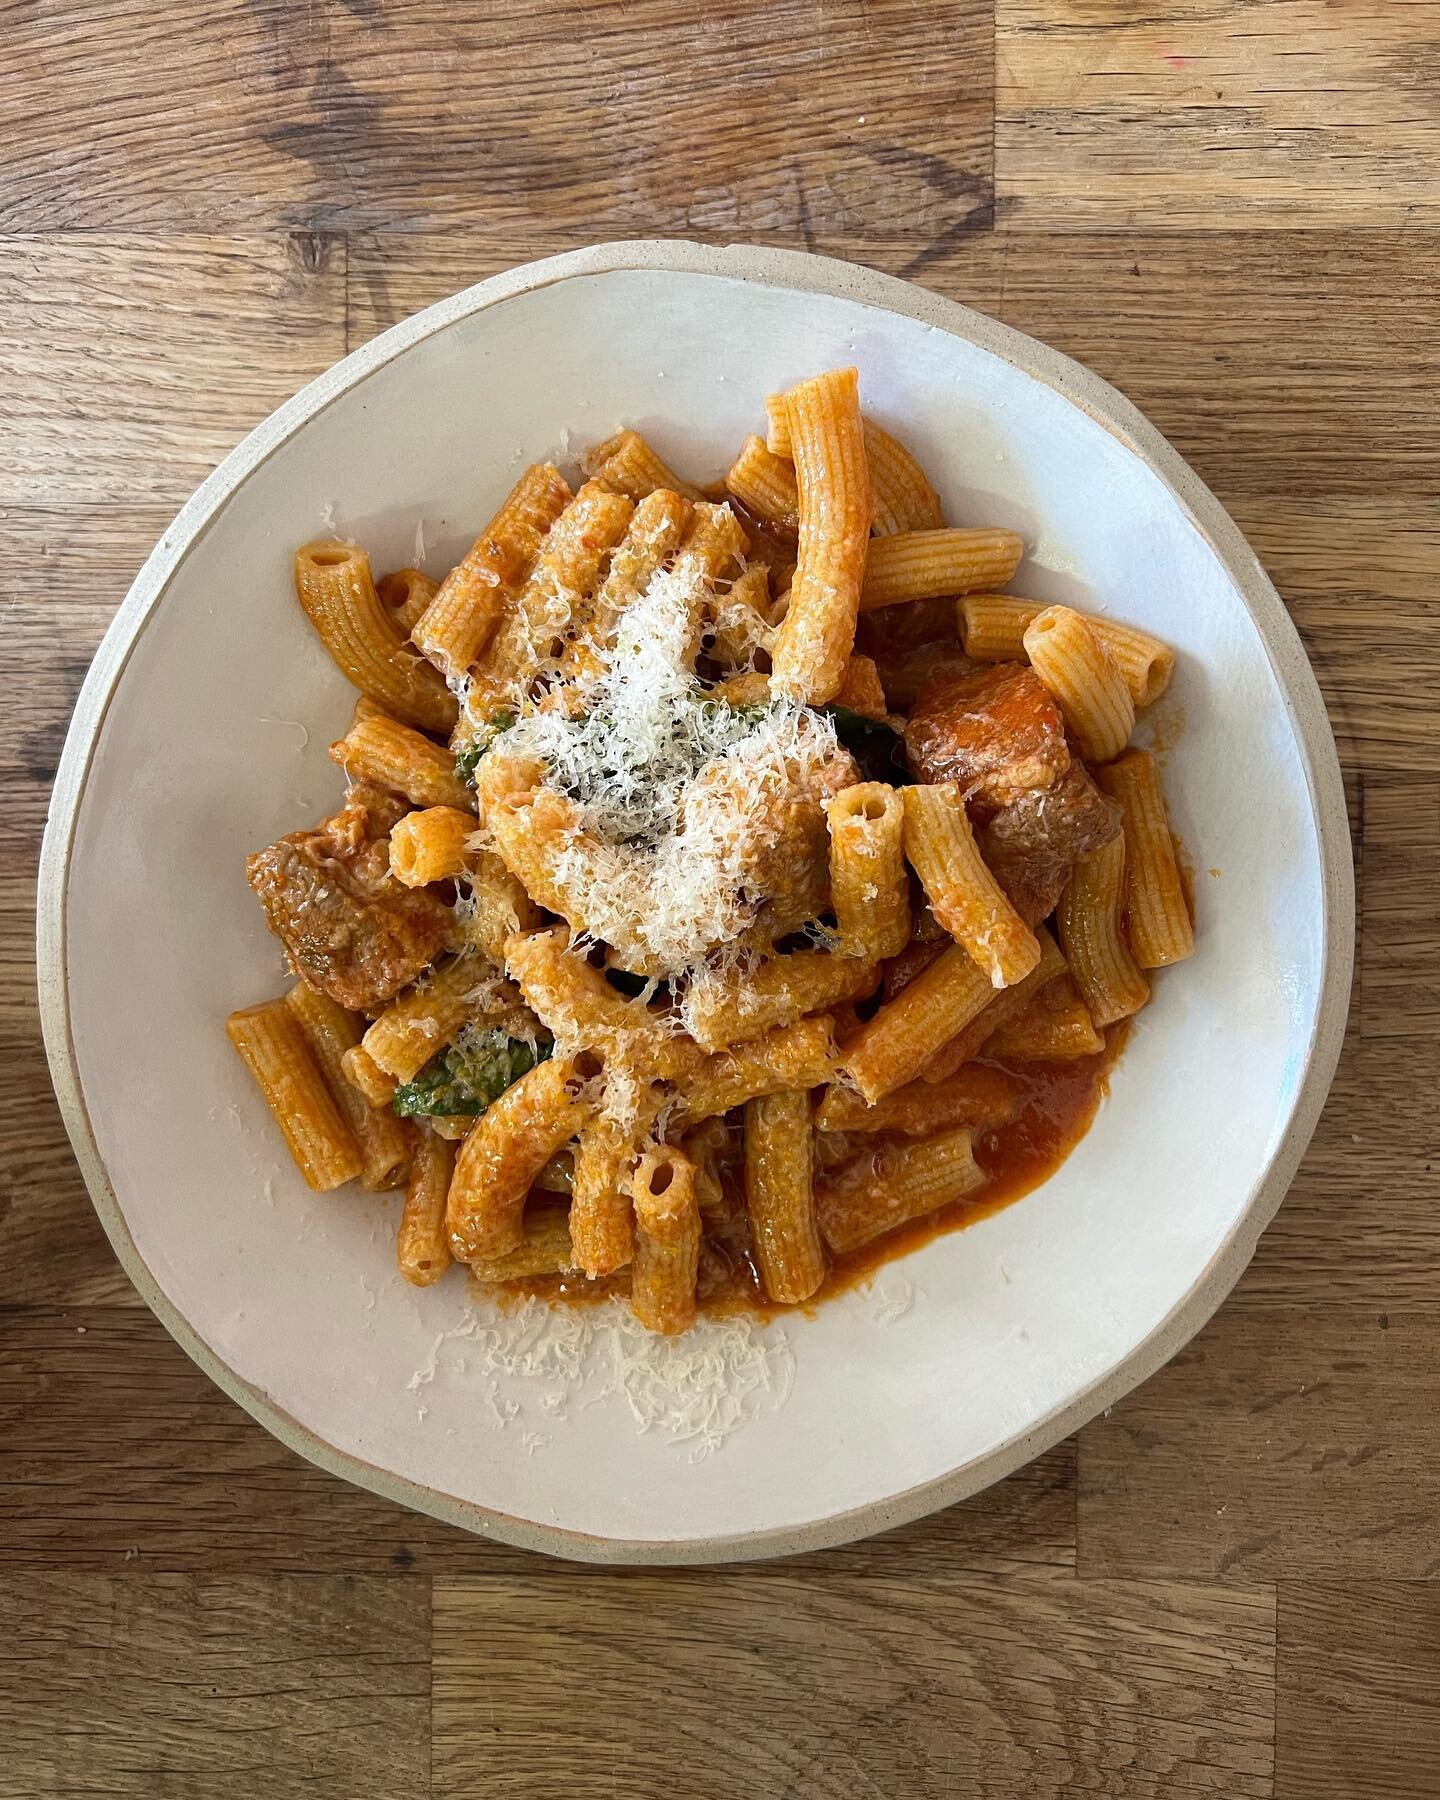 We&rsquo;ve tables free this week, pop us an email, DM, or walk by! 

This will be one of the week&rsquo;s dishes - Ziti al sugo di capra - a rich and spicy rag&ugrave; with slow cooked goat shoulder and fried peppers, with homemade wholegrain ziti p